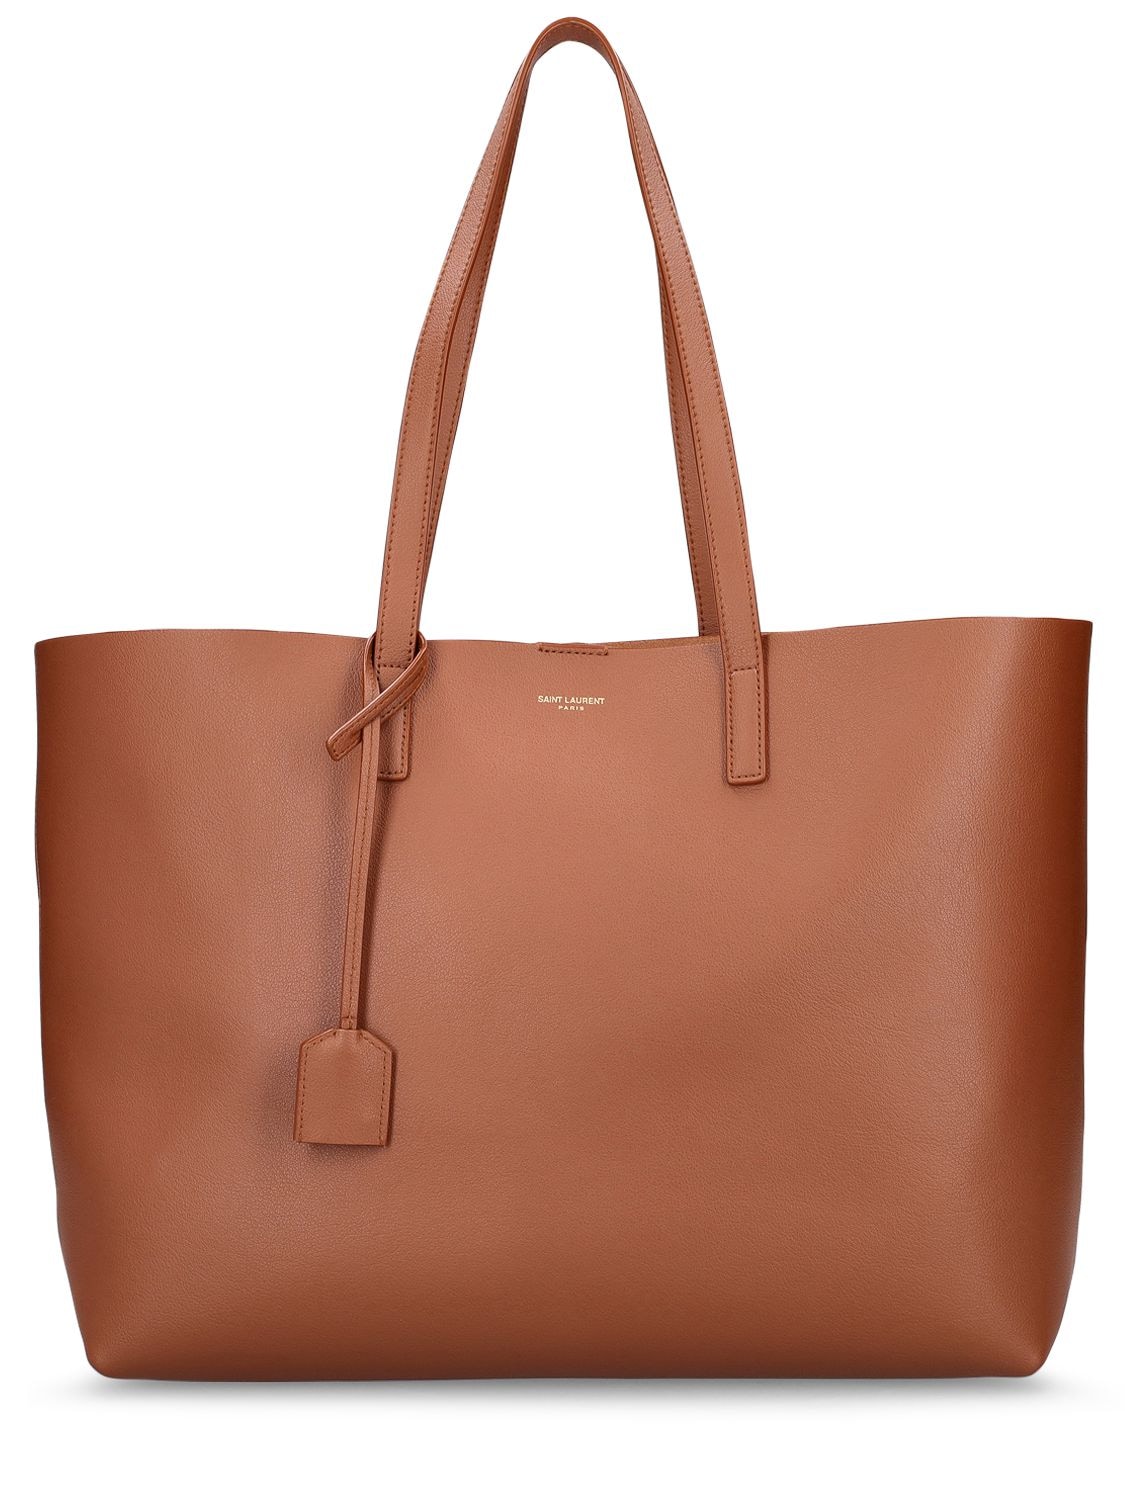 Saint Laurent Smooth Leather Tote Bag In Brick